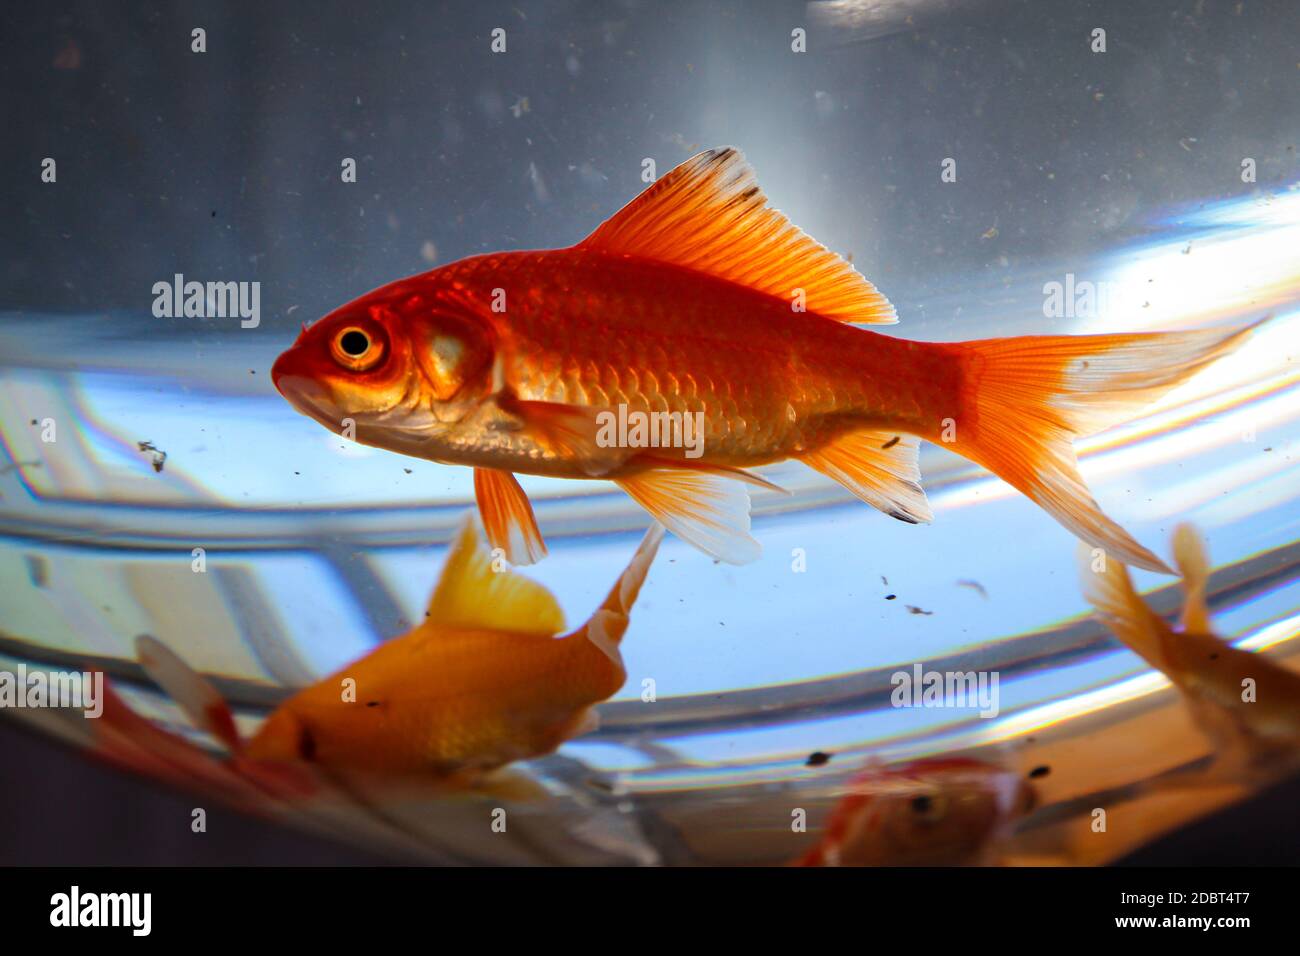 A goldfish in a large cognac glass Stock Photo